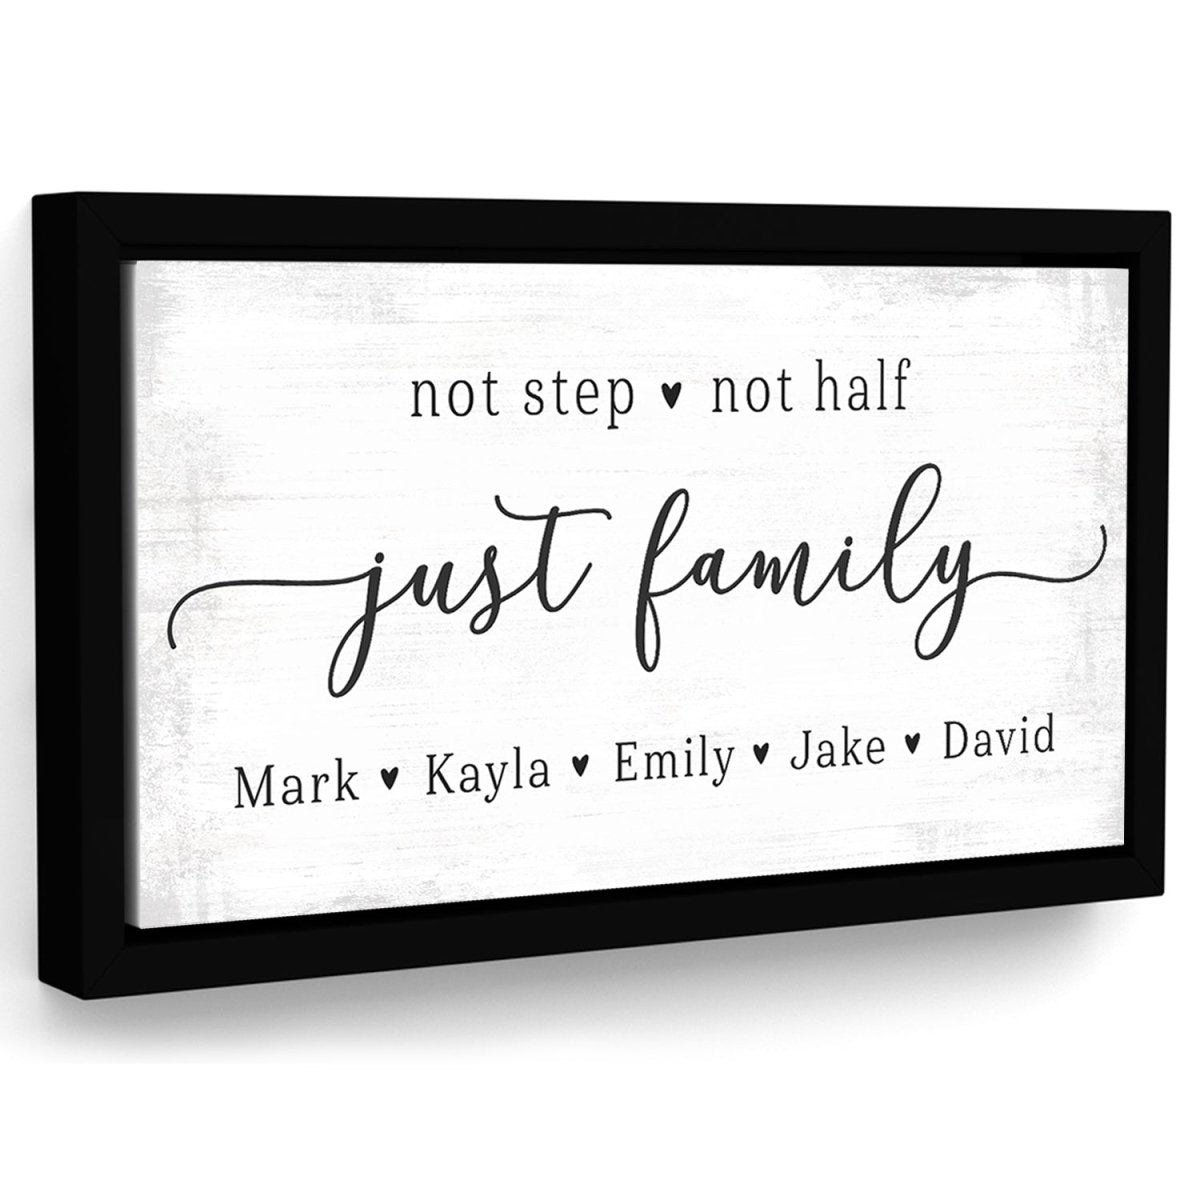 We're Not Step Not Half We Are Just Family Sign - Pretty Perfect Studio\